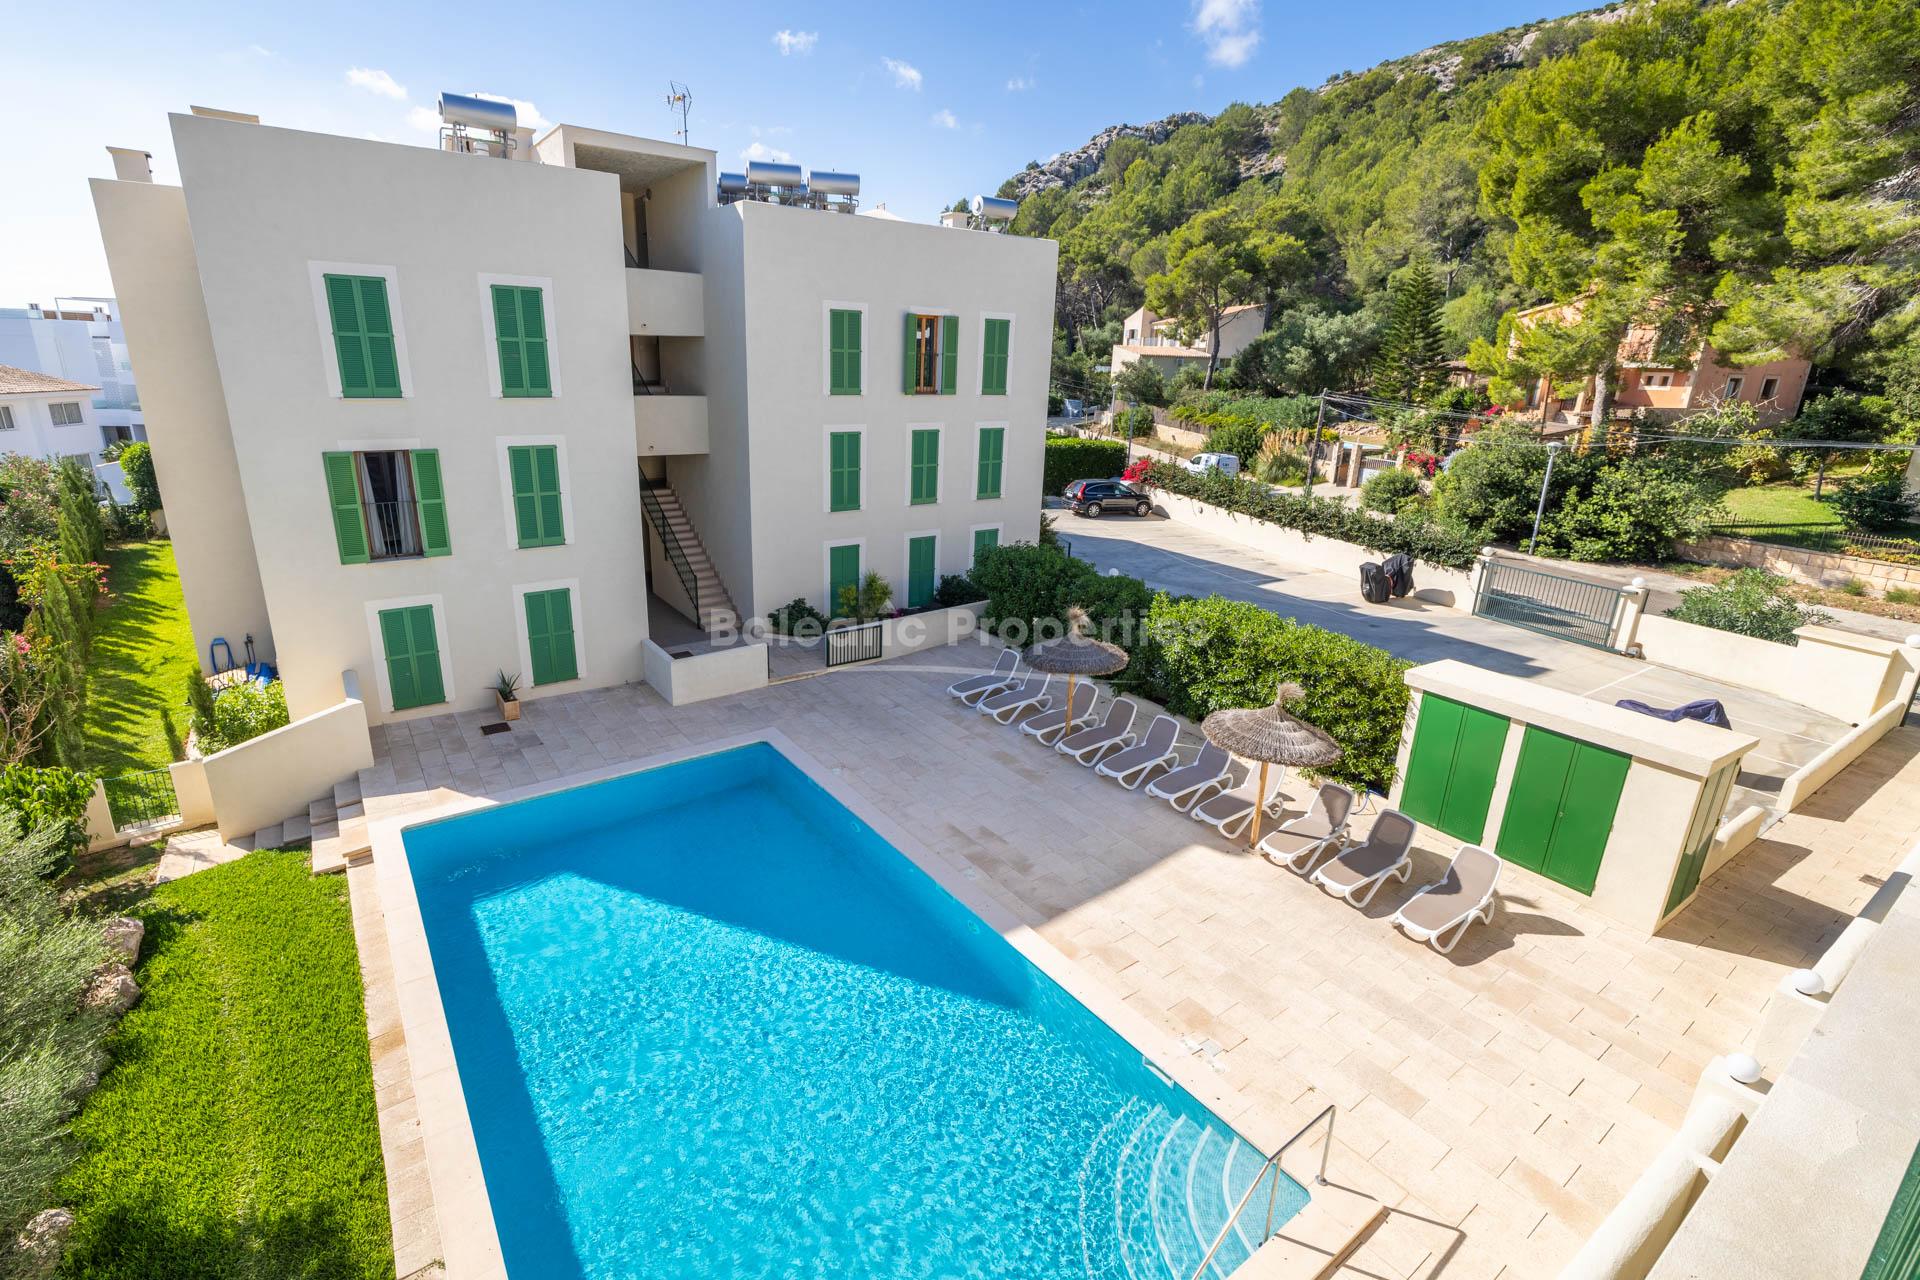 Apartments for sale on a new development in Puerto Pollensa, Mallorca